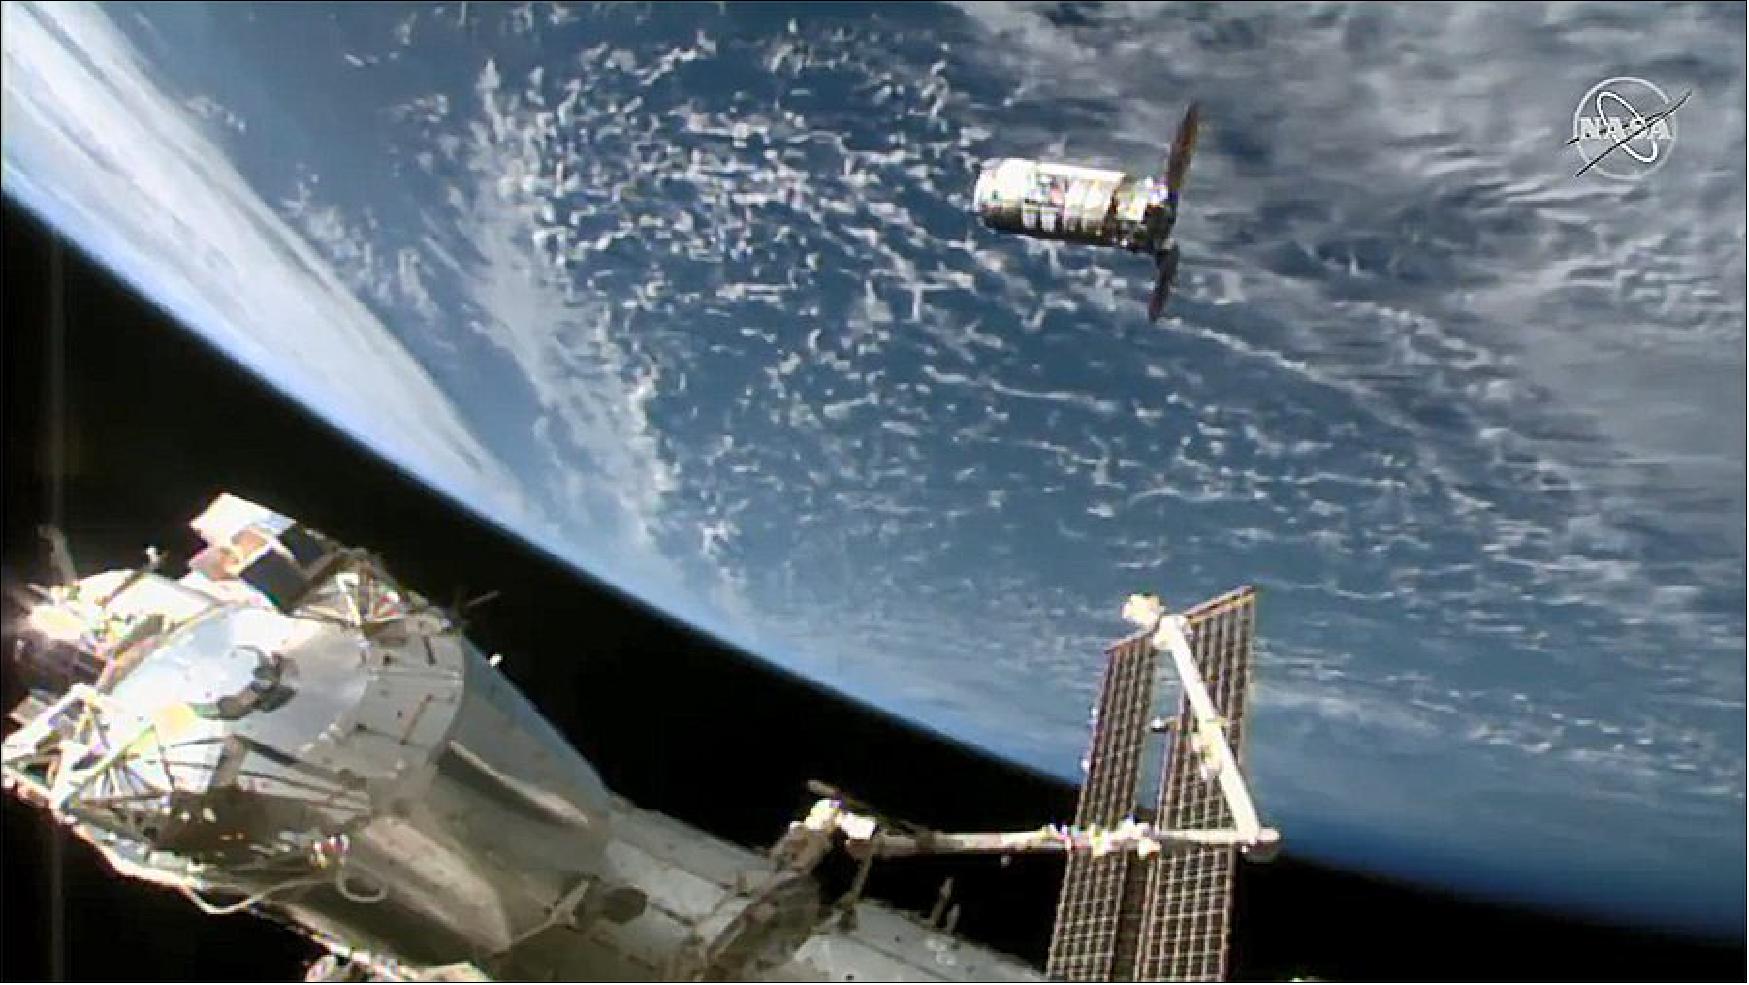 Figure 8: The Northrop Grumman Cygnus-15 resupply ship is pictured about 30 meters away from the space station approaching its capture point near the Canadarm2 robotic arm (image credit: NASA TV)